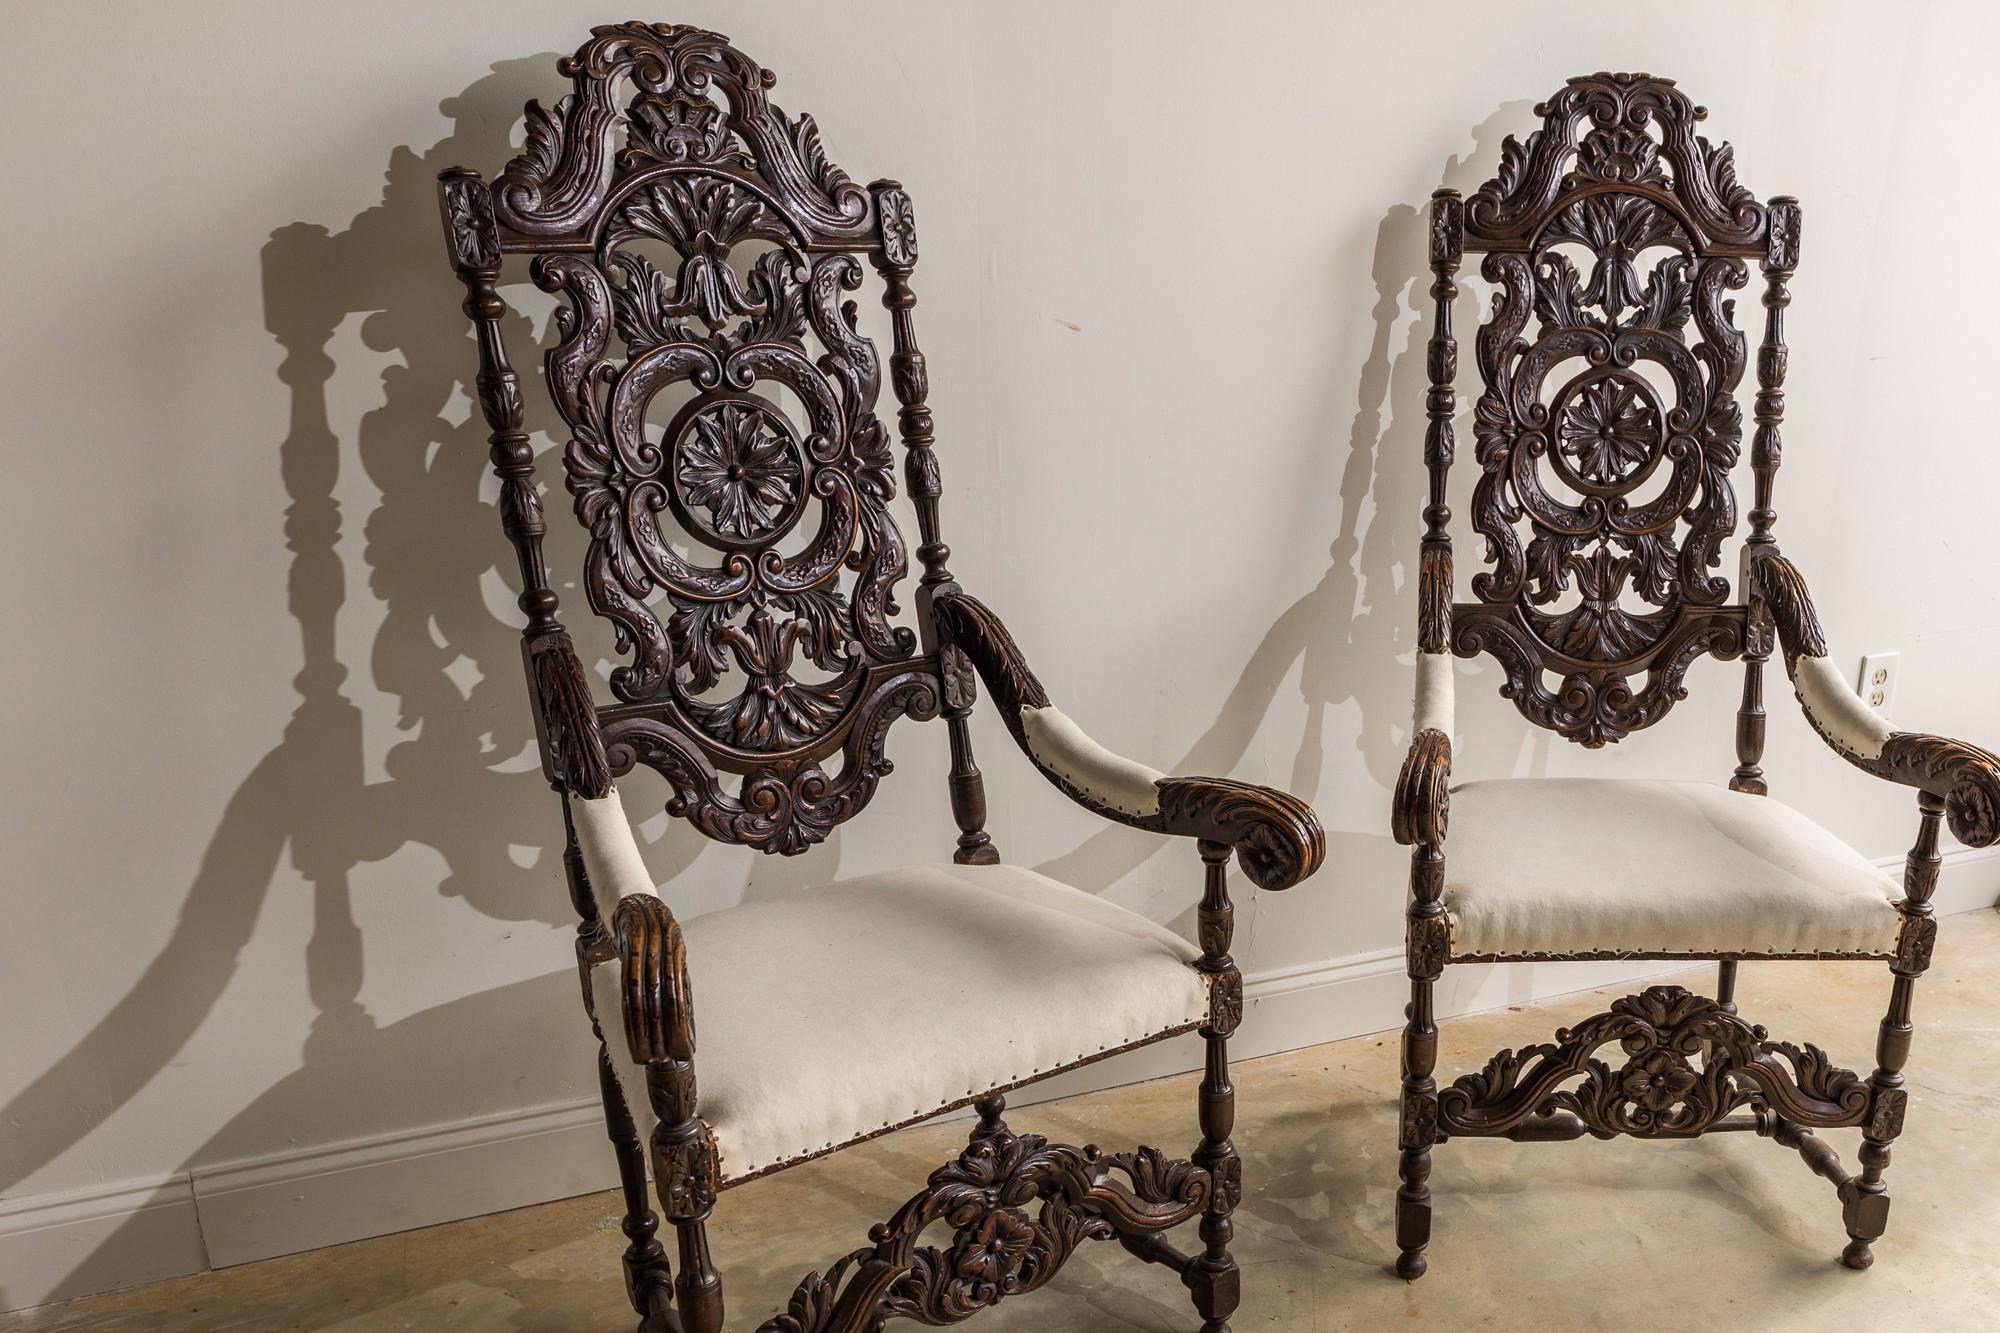 This pair of Renaissance style Italian armchairs look to be fit for a king. The tall seat back has beautiful hand carved wood and aged dark painted finish. The wood species is unknown. It is upholstered in a simple white cotton fabric with small